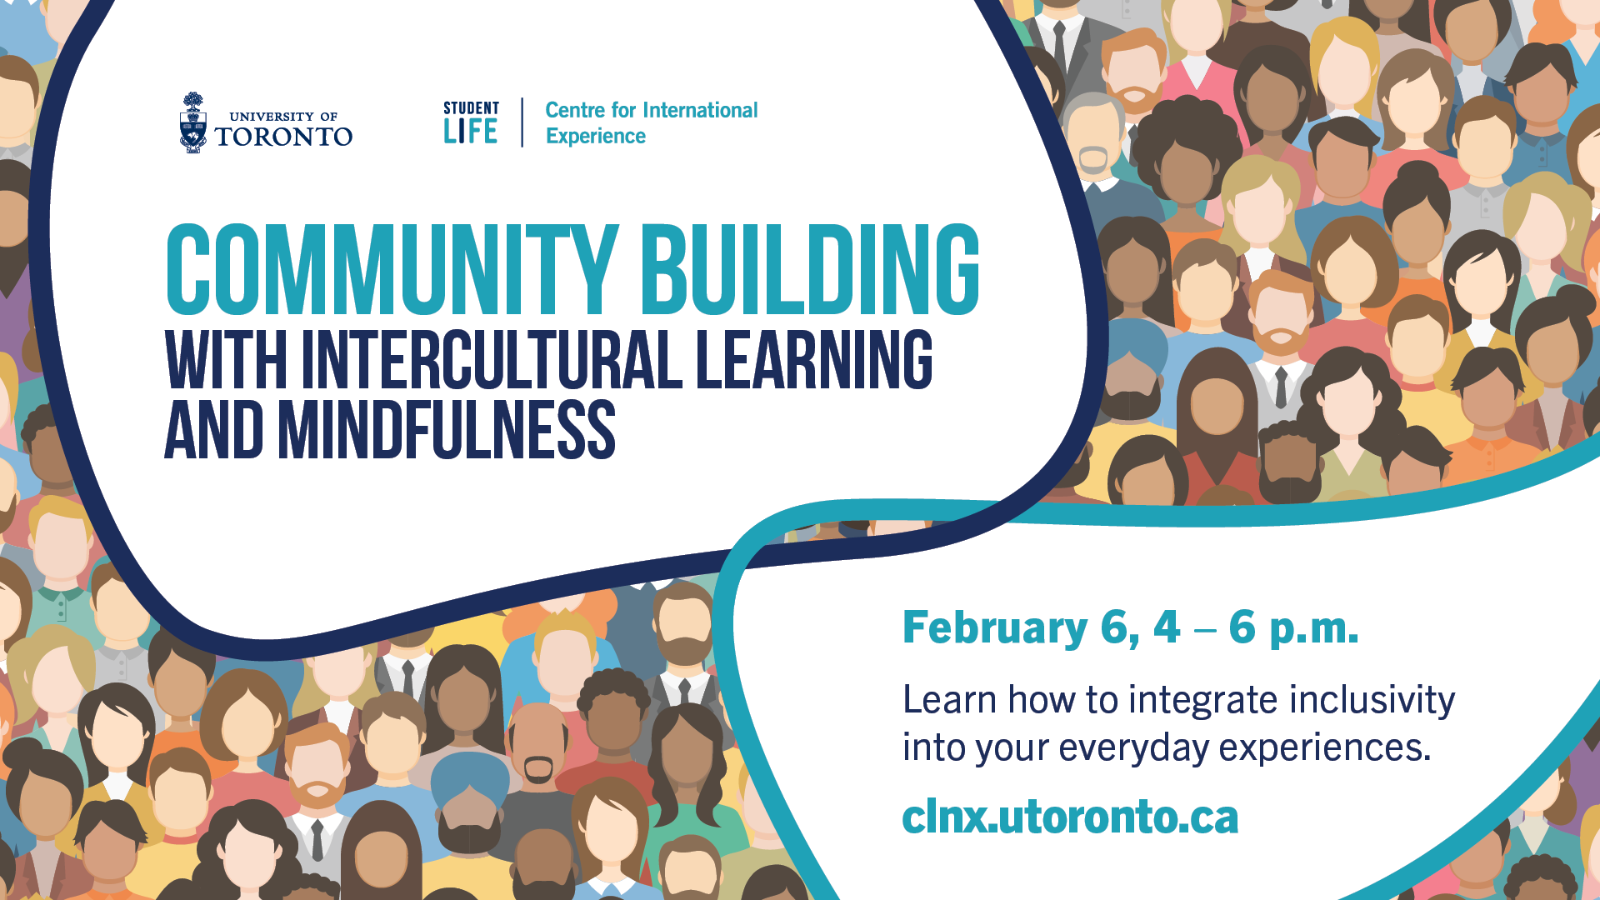 An image with diverse people with text, "Community Building with Intercultural Learning and Mindfulness; February 6, 4-6 p.m.; Learn how to integrate inclusivity into your everyday experiences. clnx.utoronto.ca".  